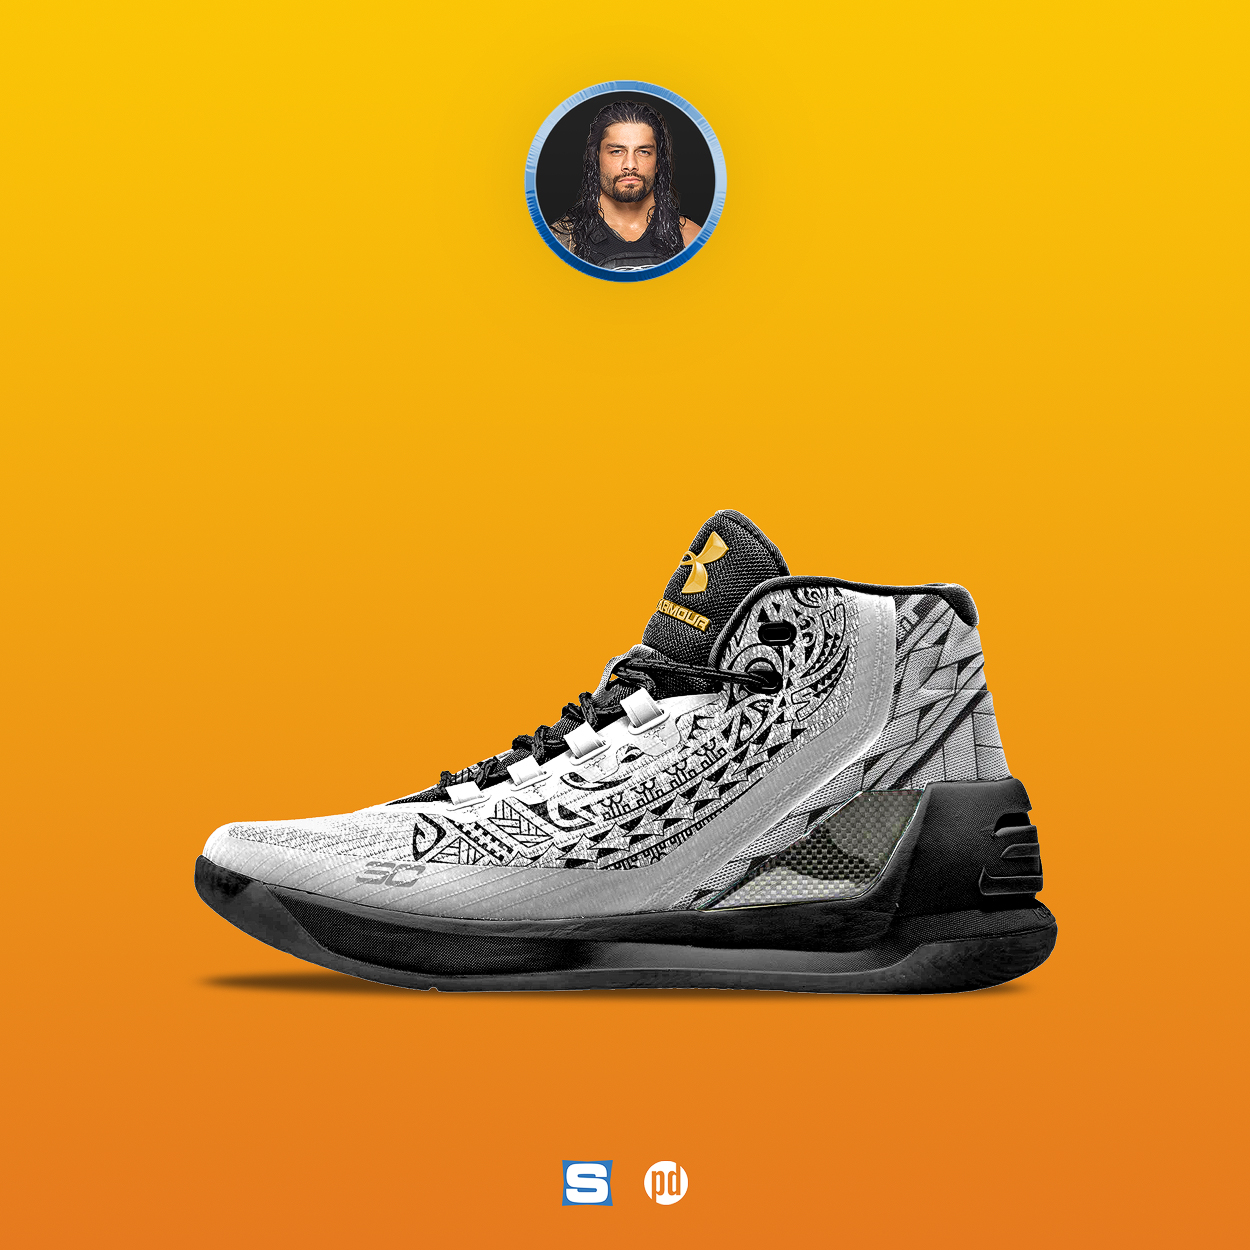 Roman Reigns x Under Armour Curry 3